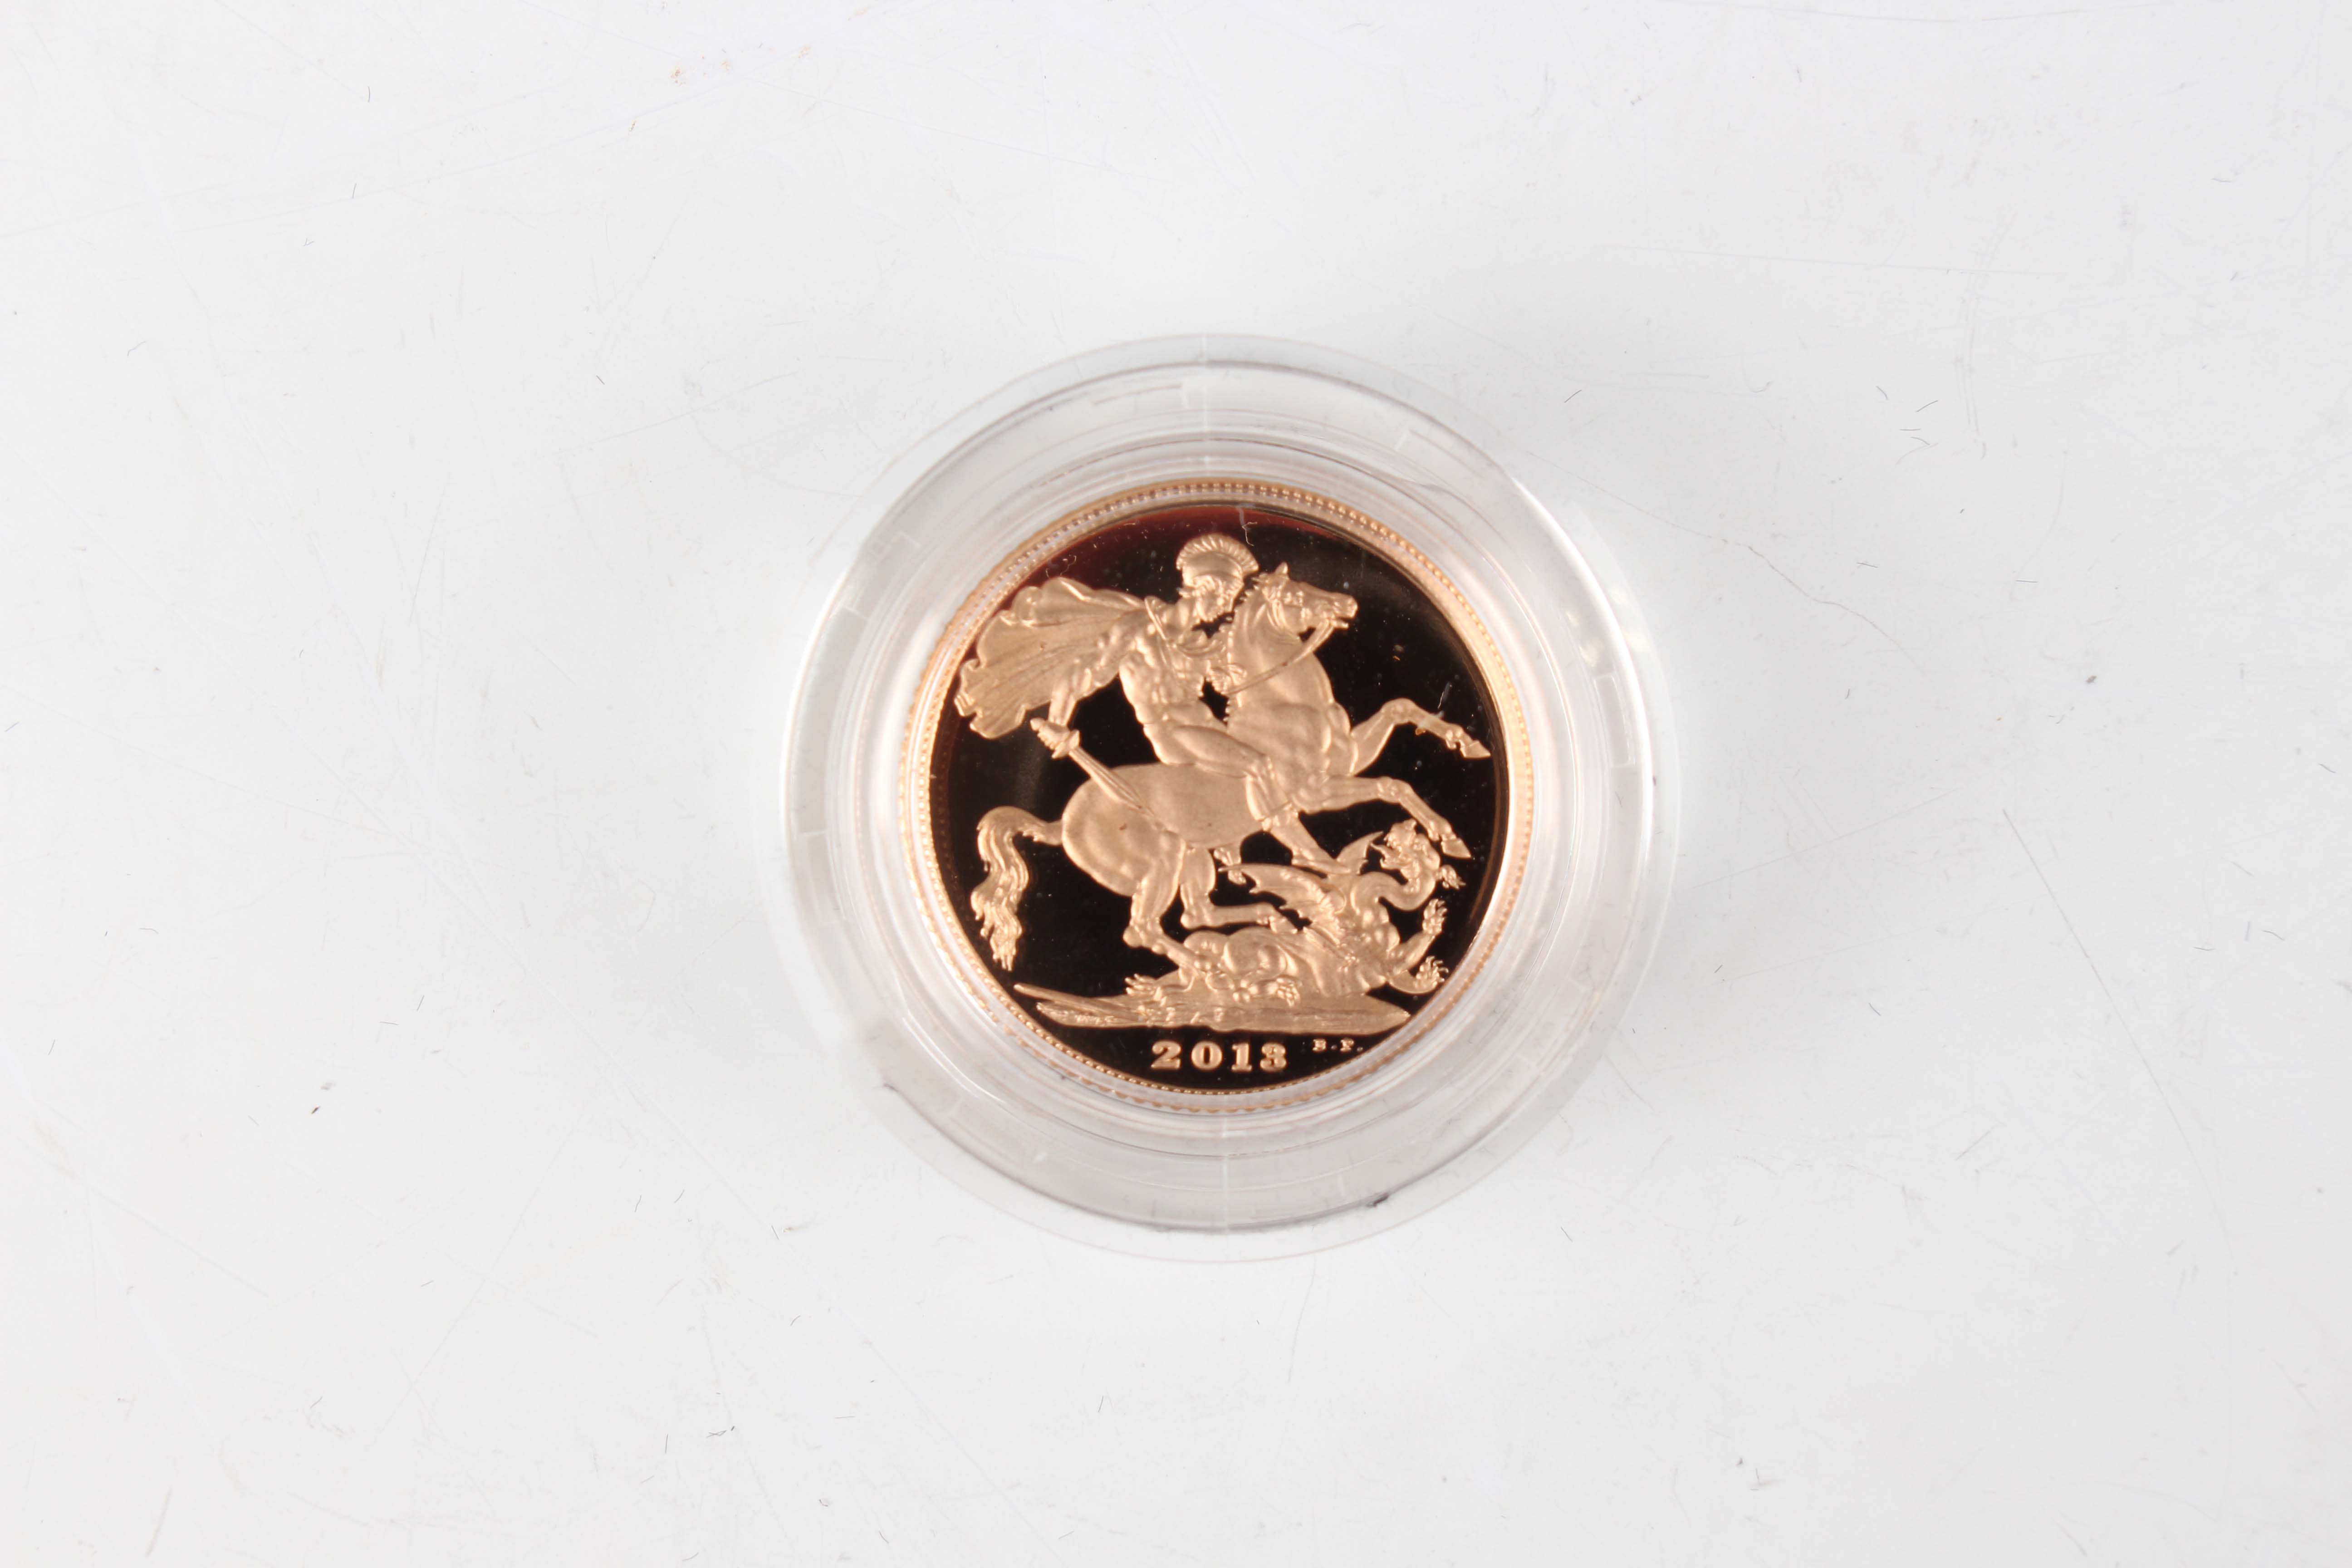 An Elizabeth II Royal Mint sovereign four-coin set 2013 commemorating the 60th Anniversary of the - Image 7 of 9